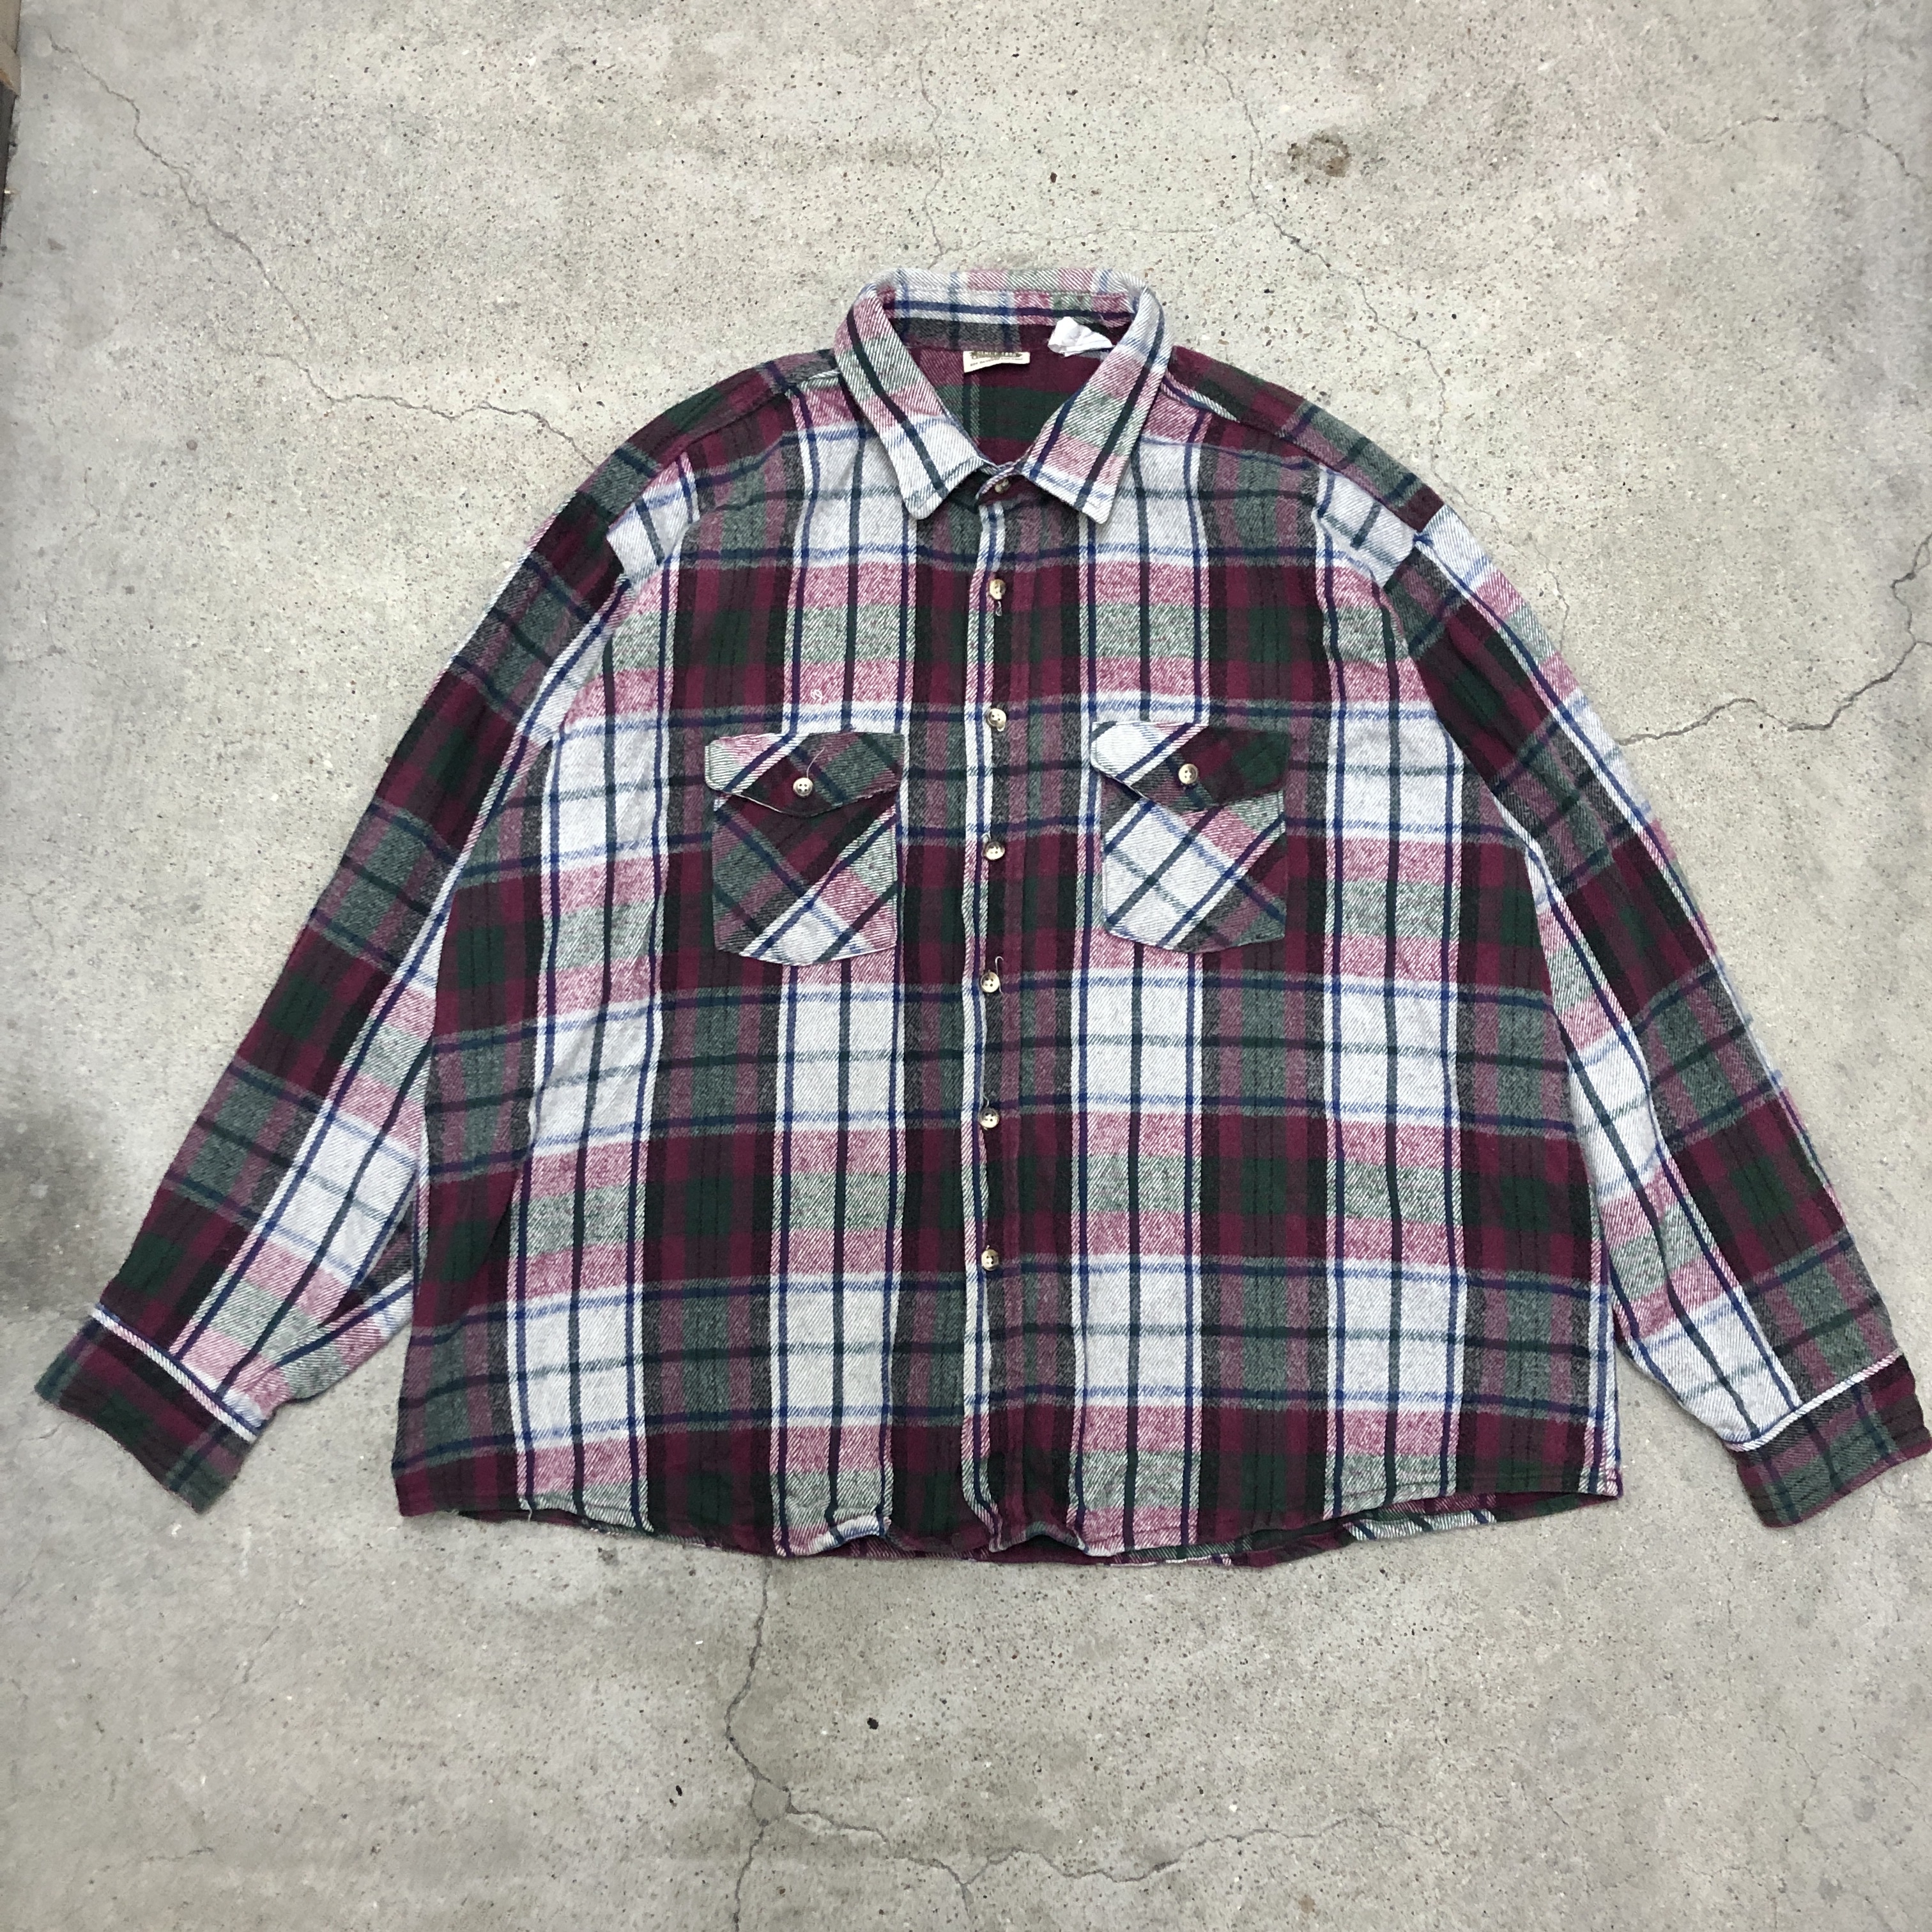 90s FIVE BROTHER/Heavy Flannel Shirt/USA製/3XL/チェック柄